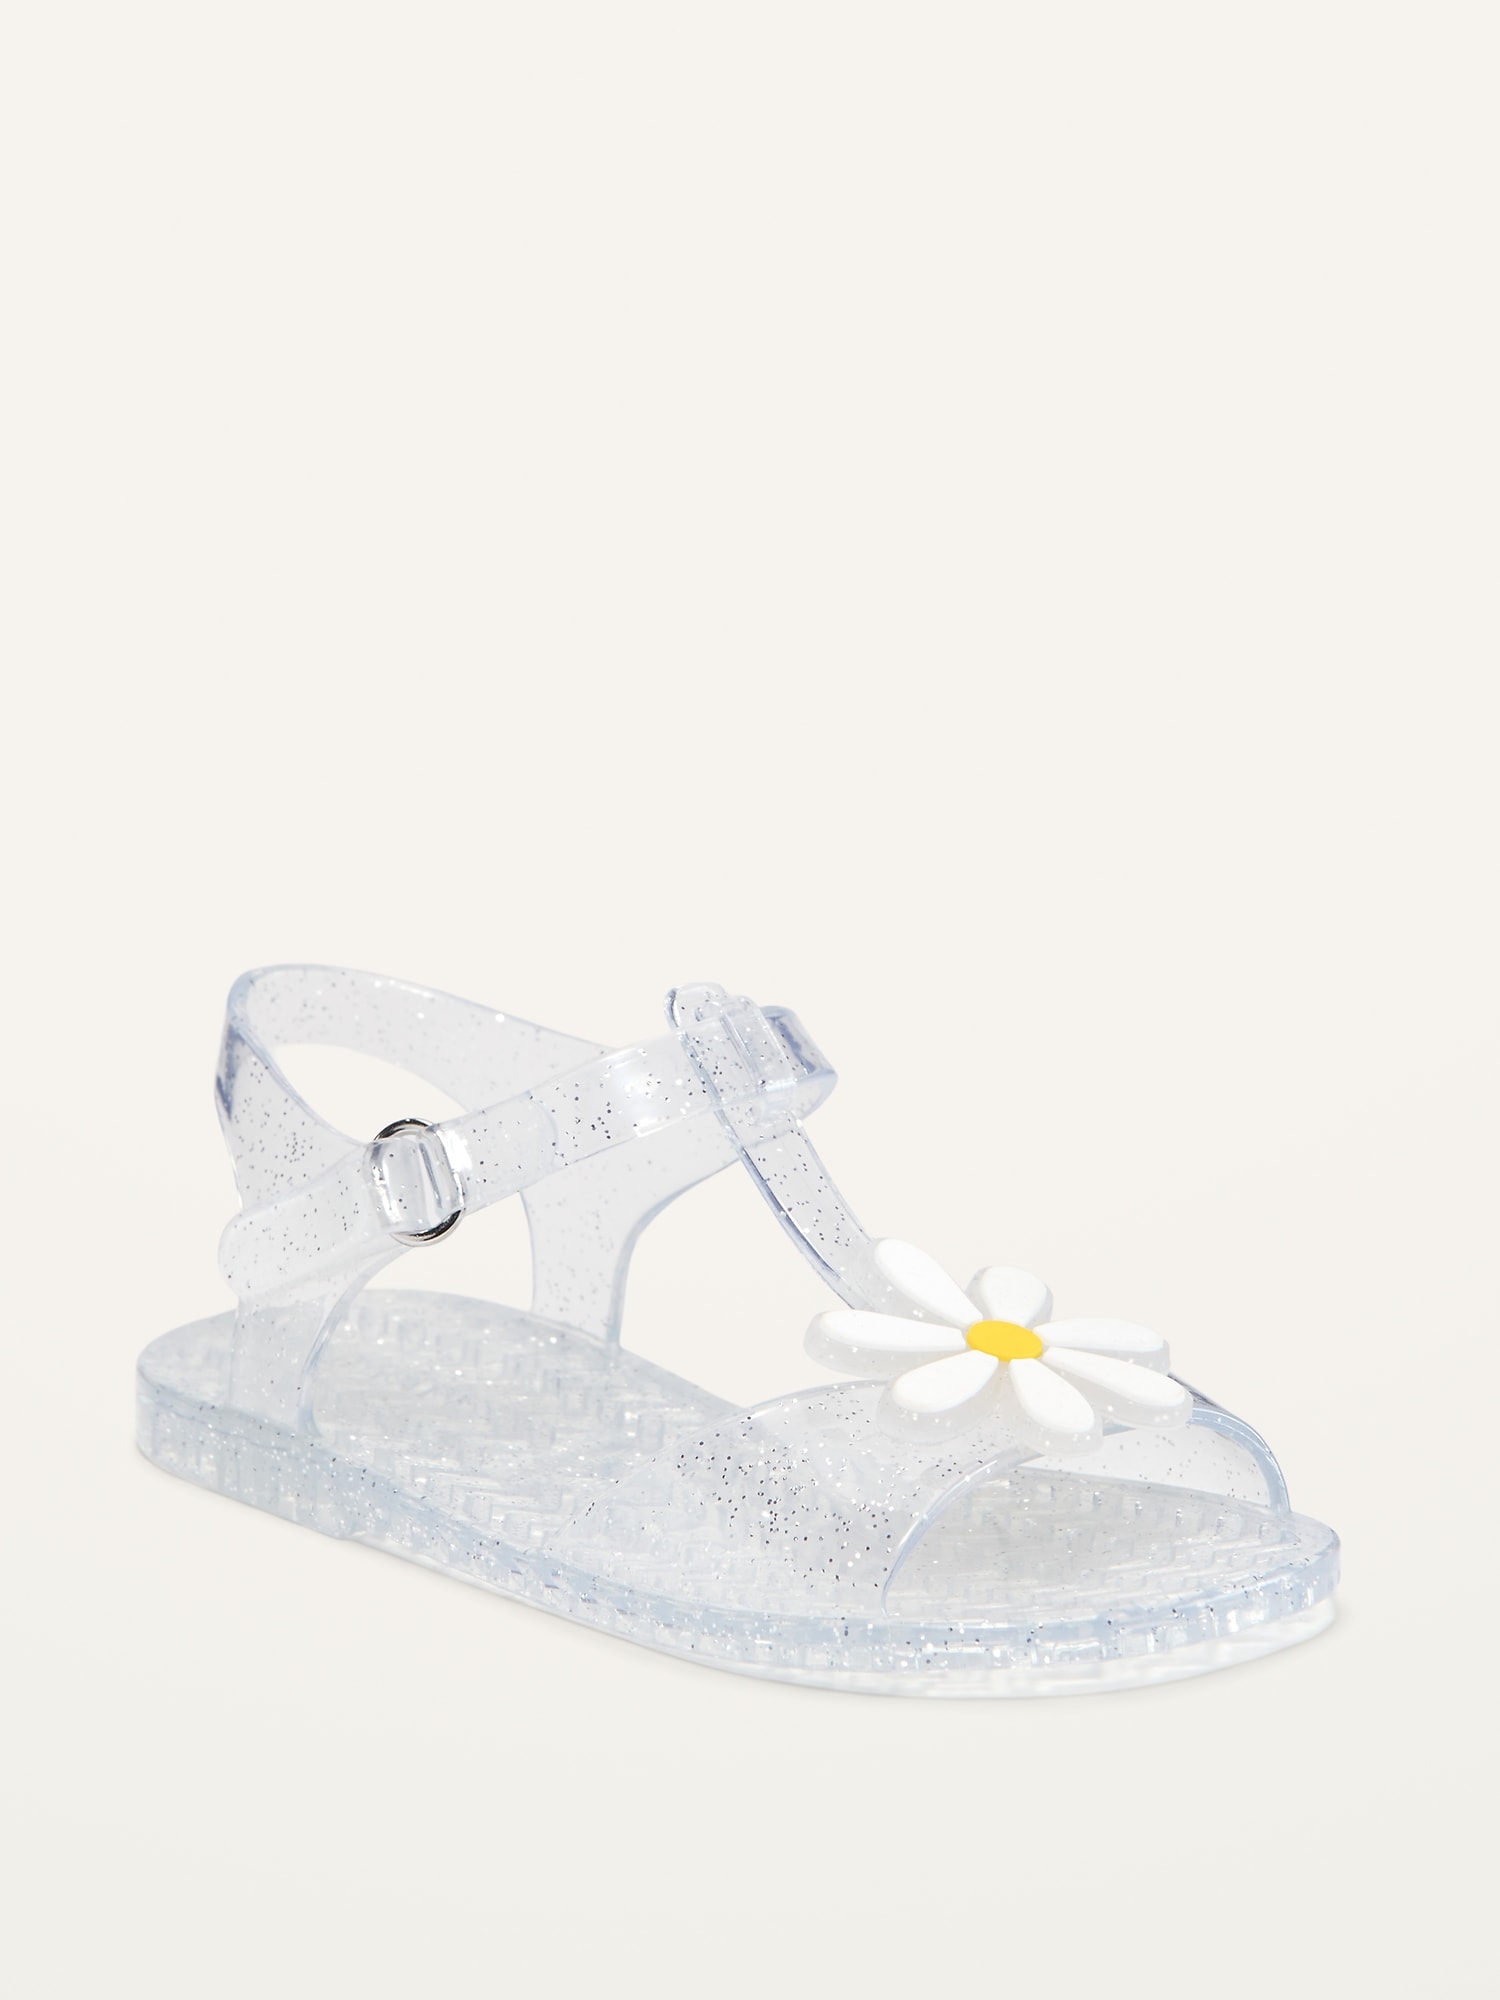 T-Strap Jelly Sandals for Toddler Girls